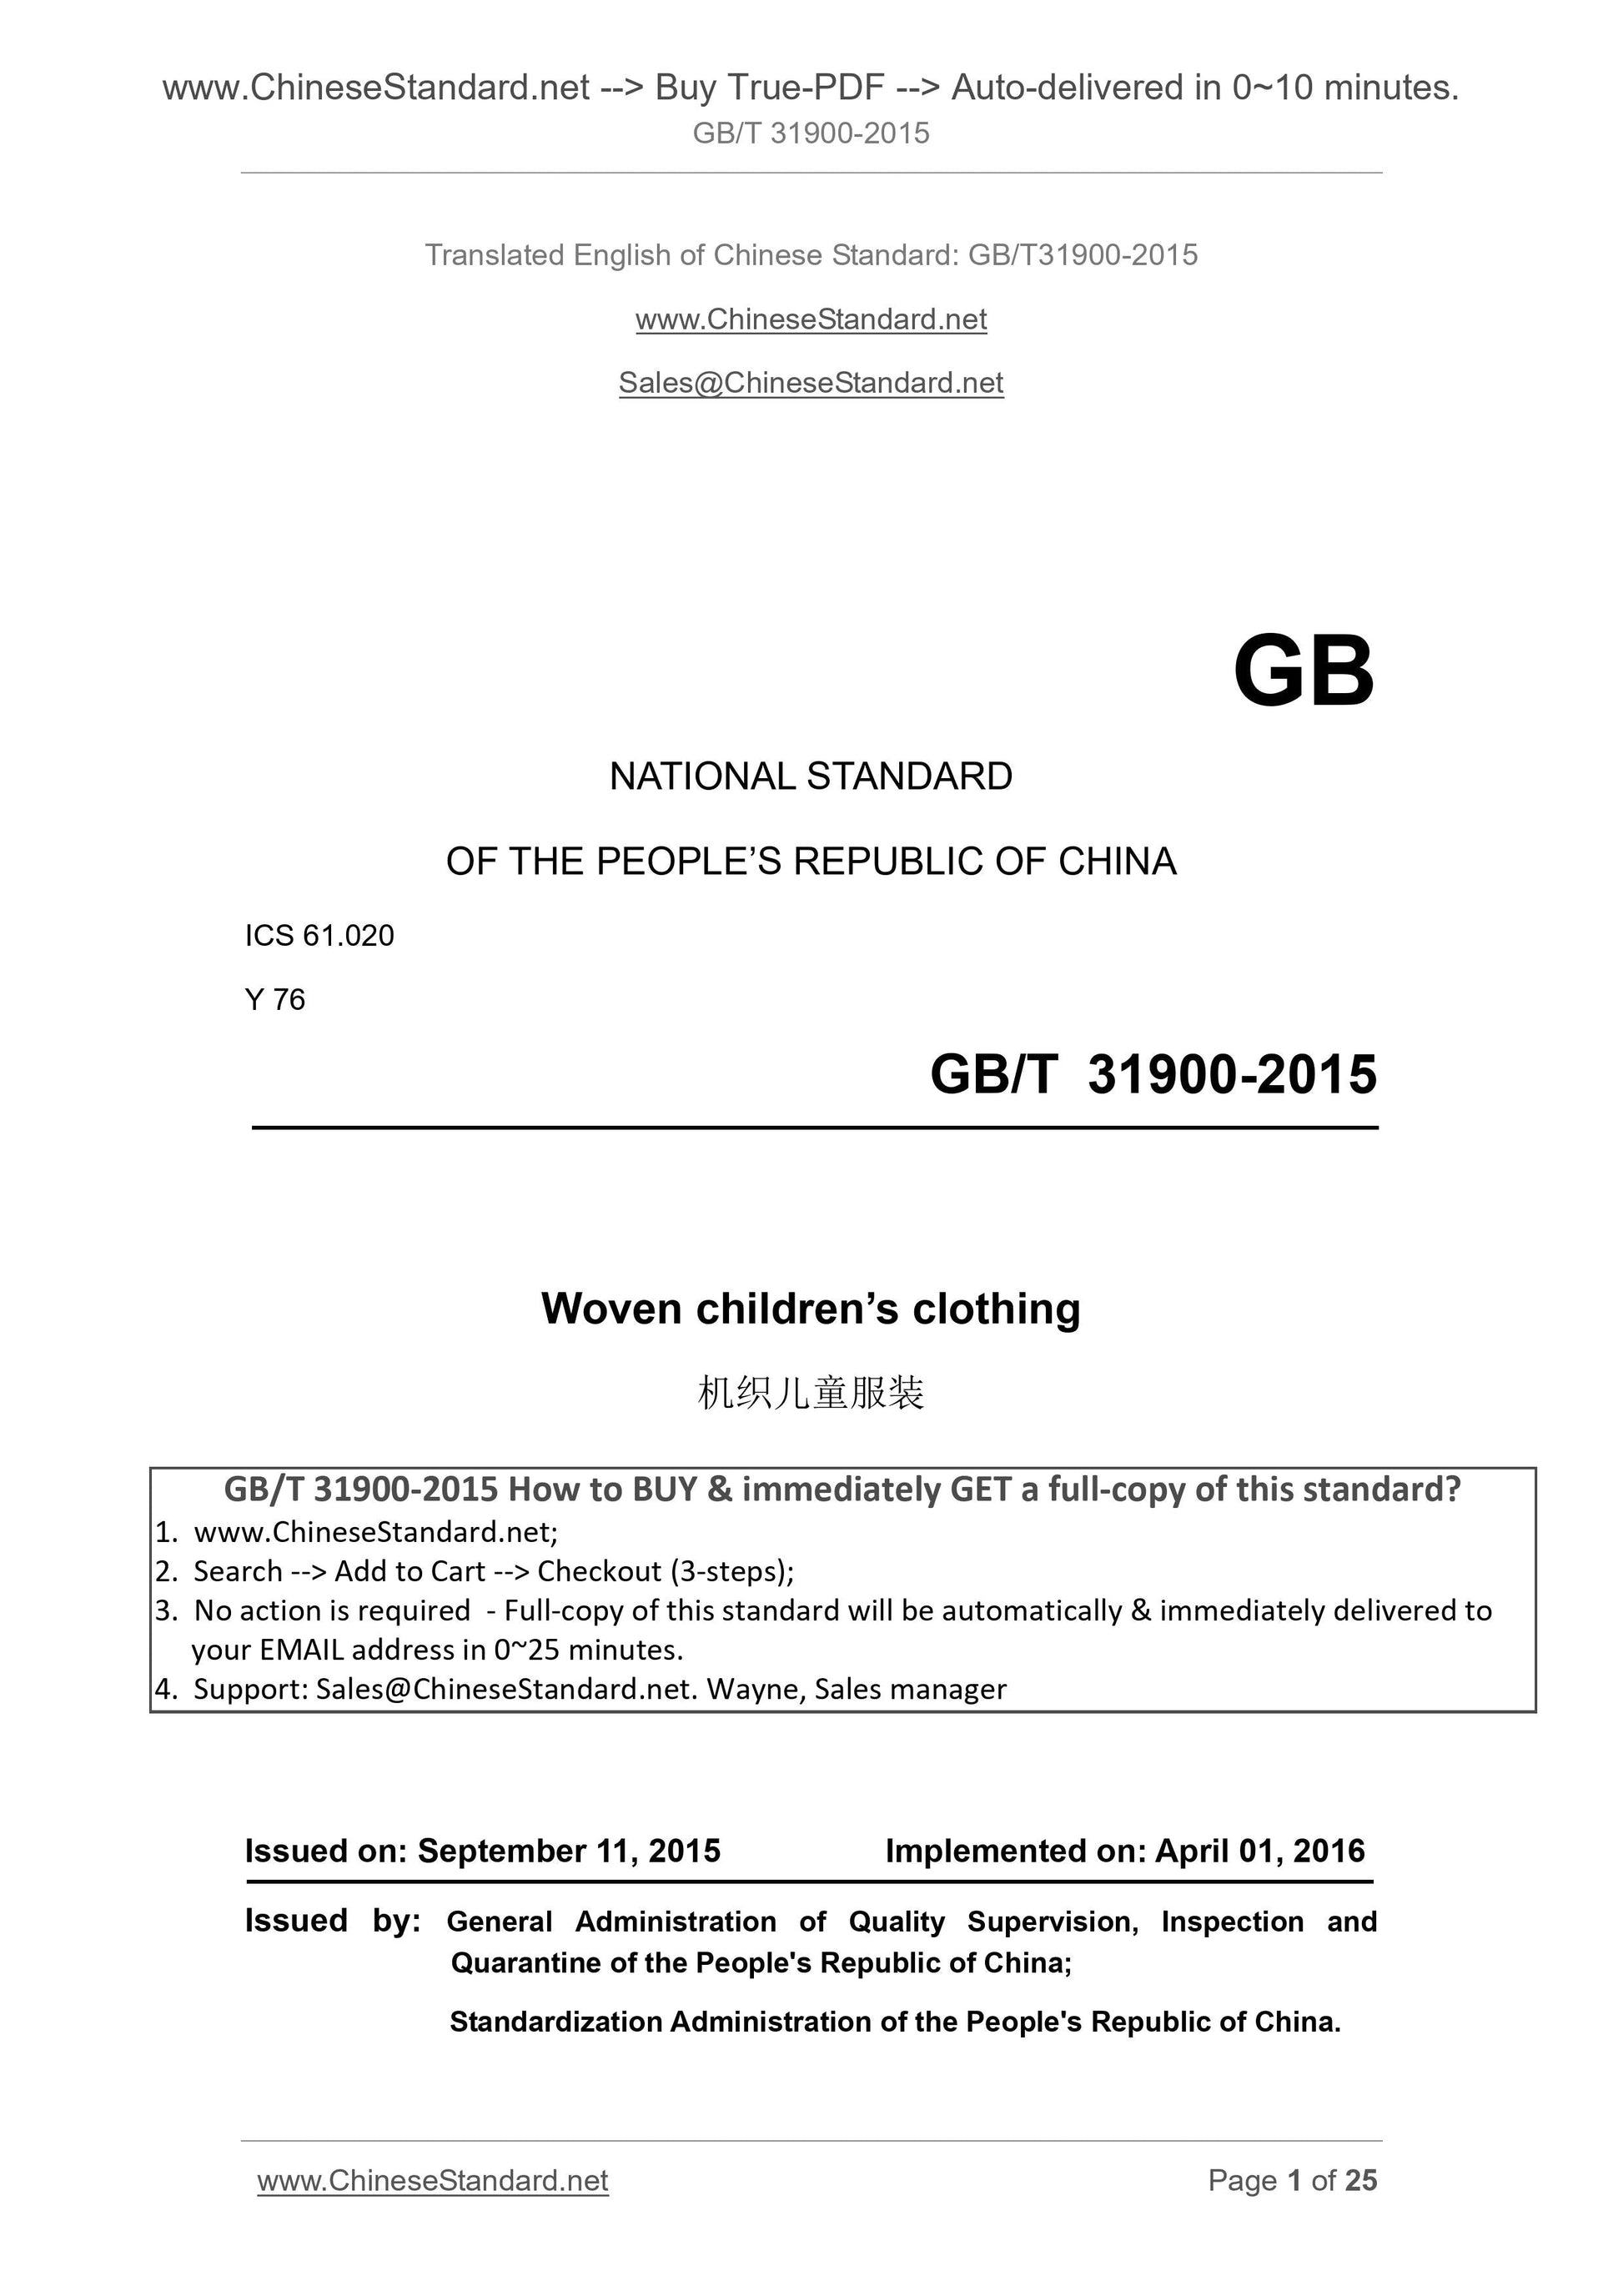 GB/T 31900-2015 Page 1